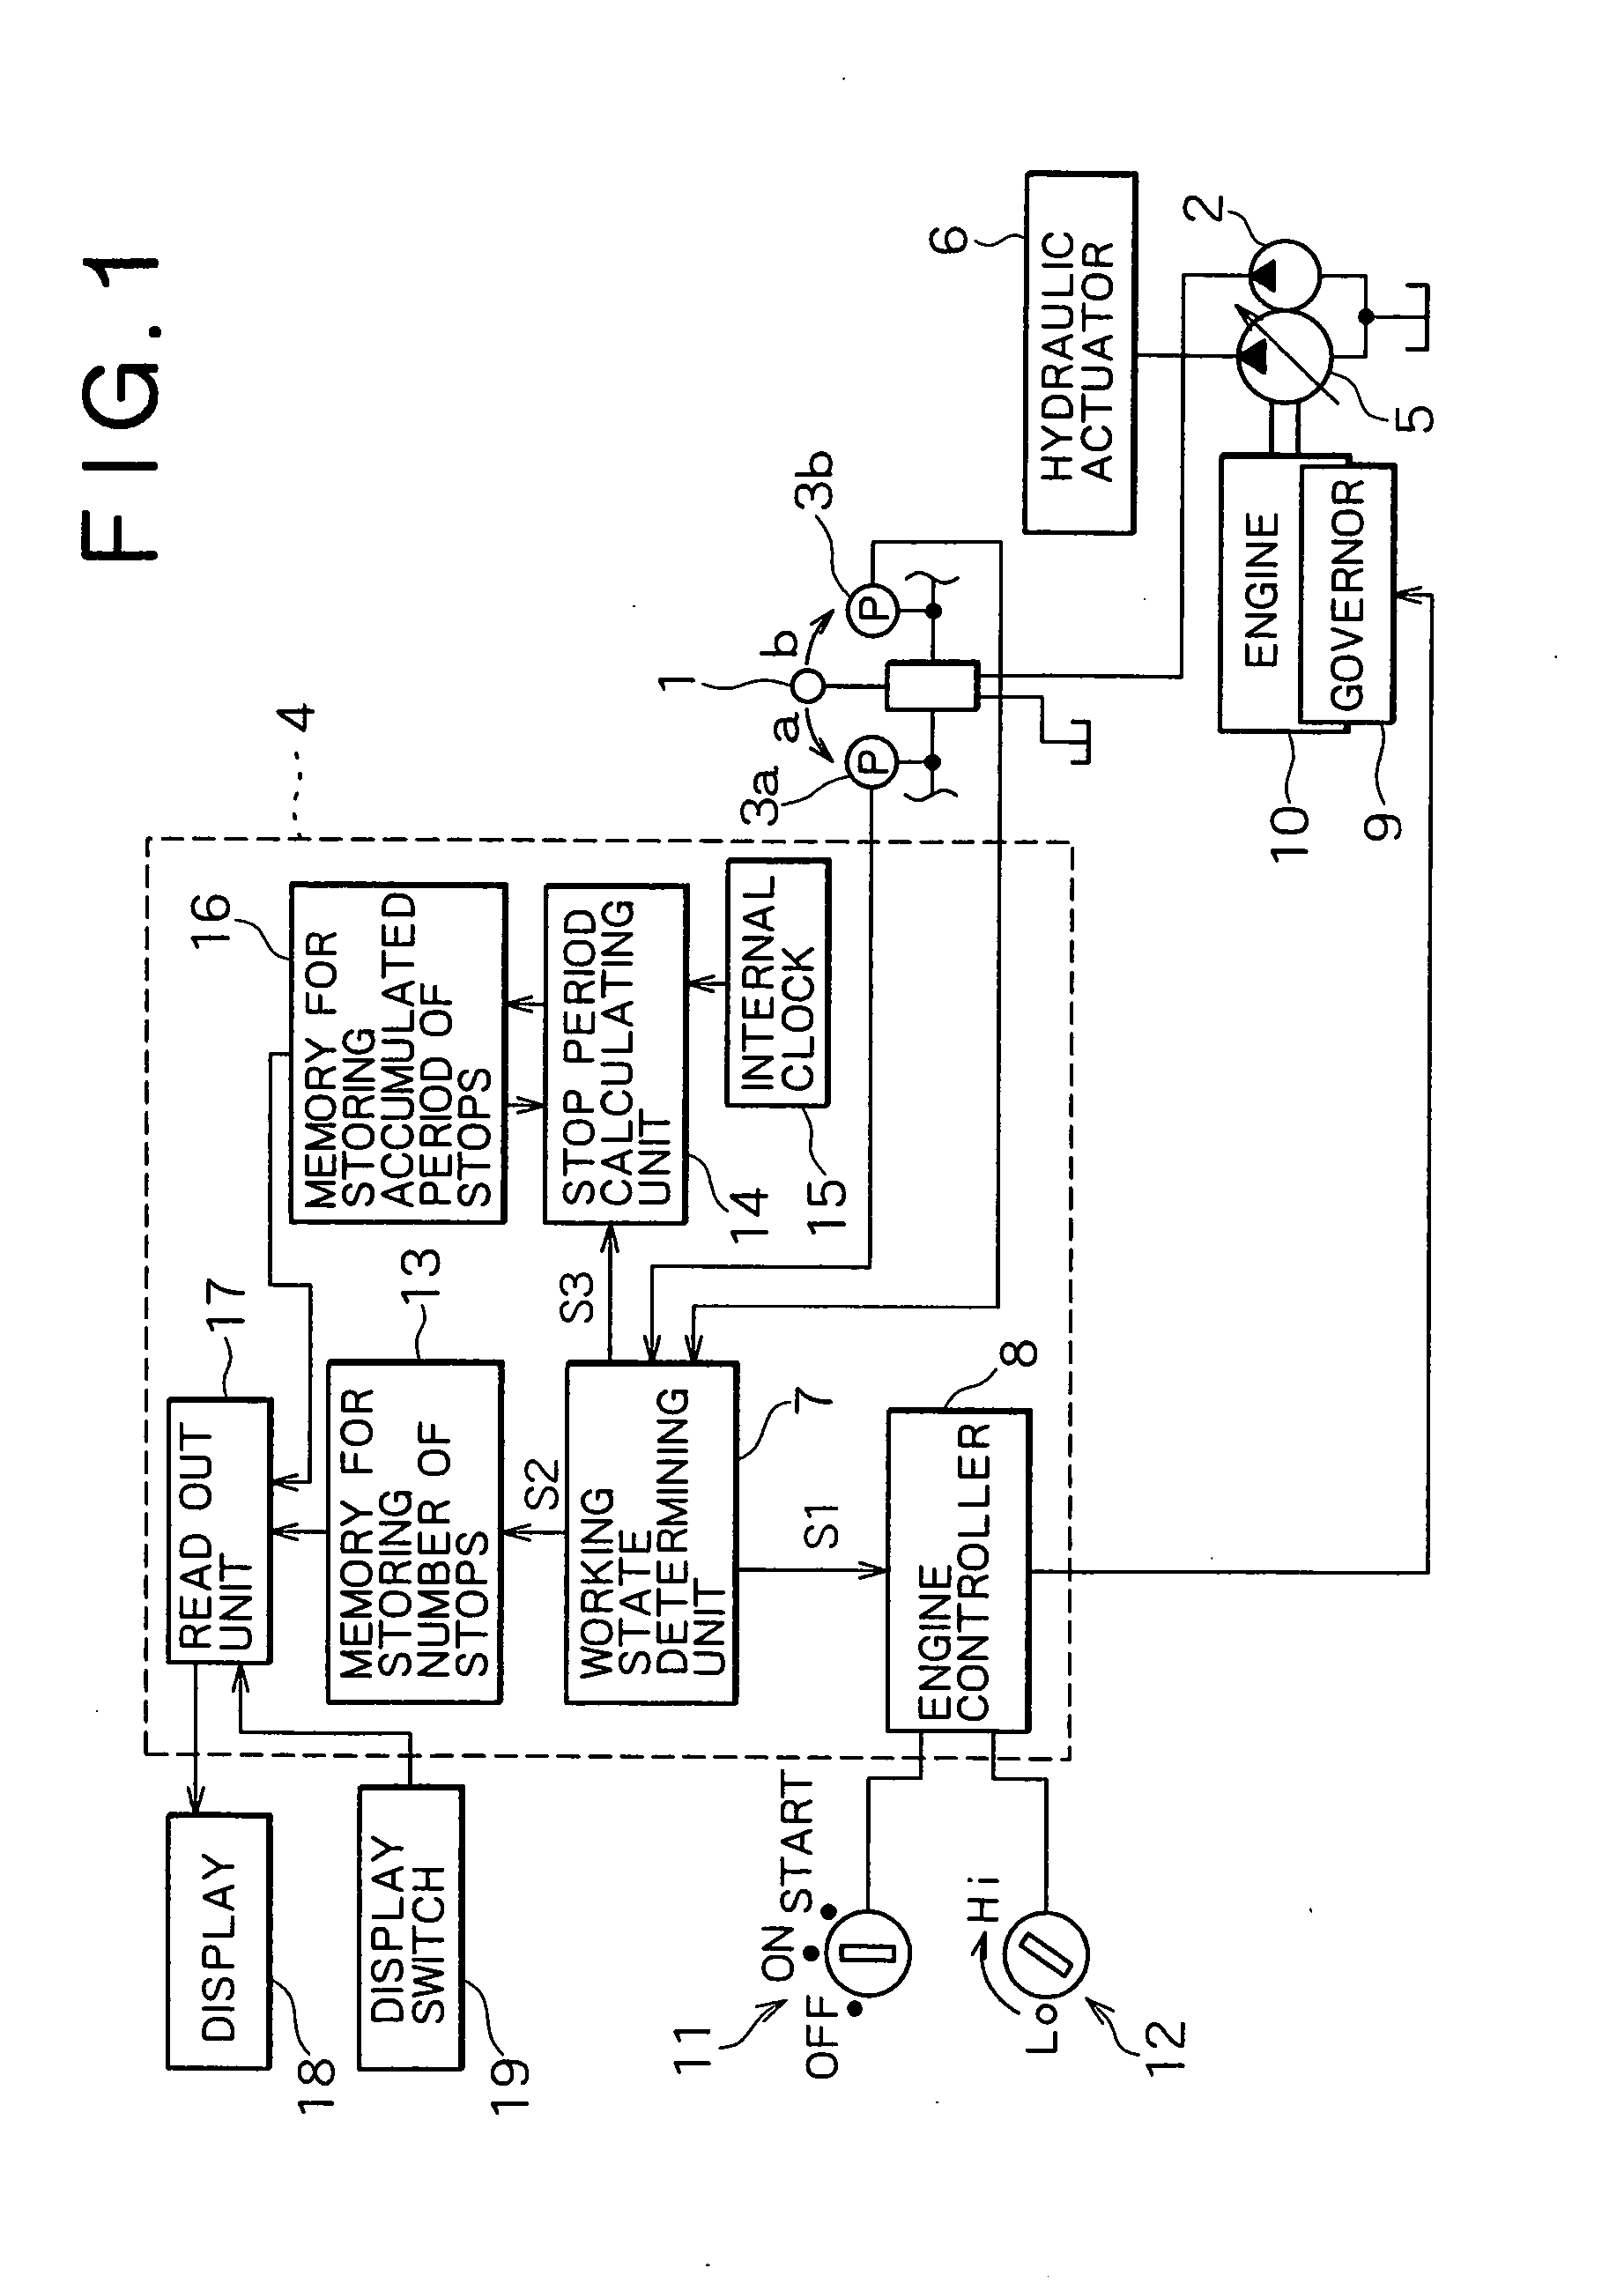 Engine control device for and administration system for contruction machine